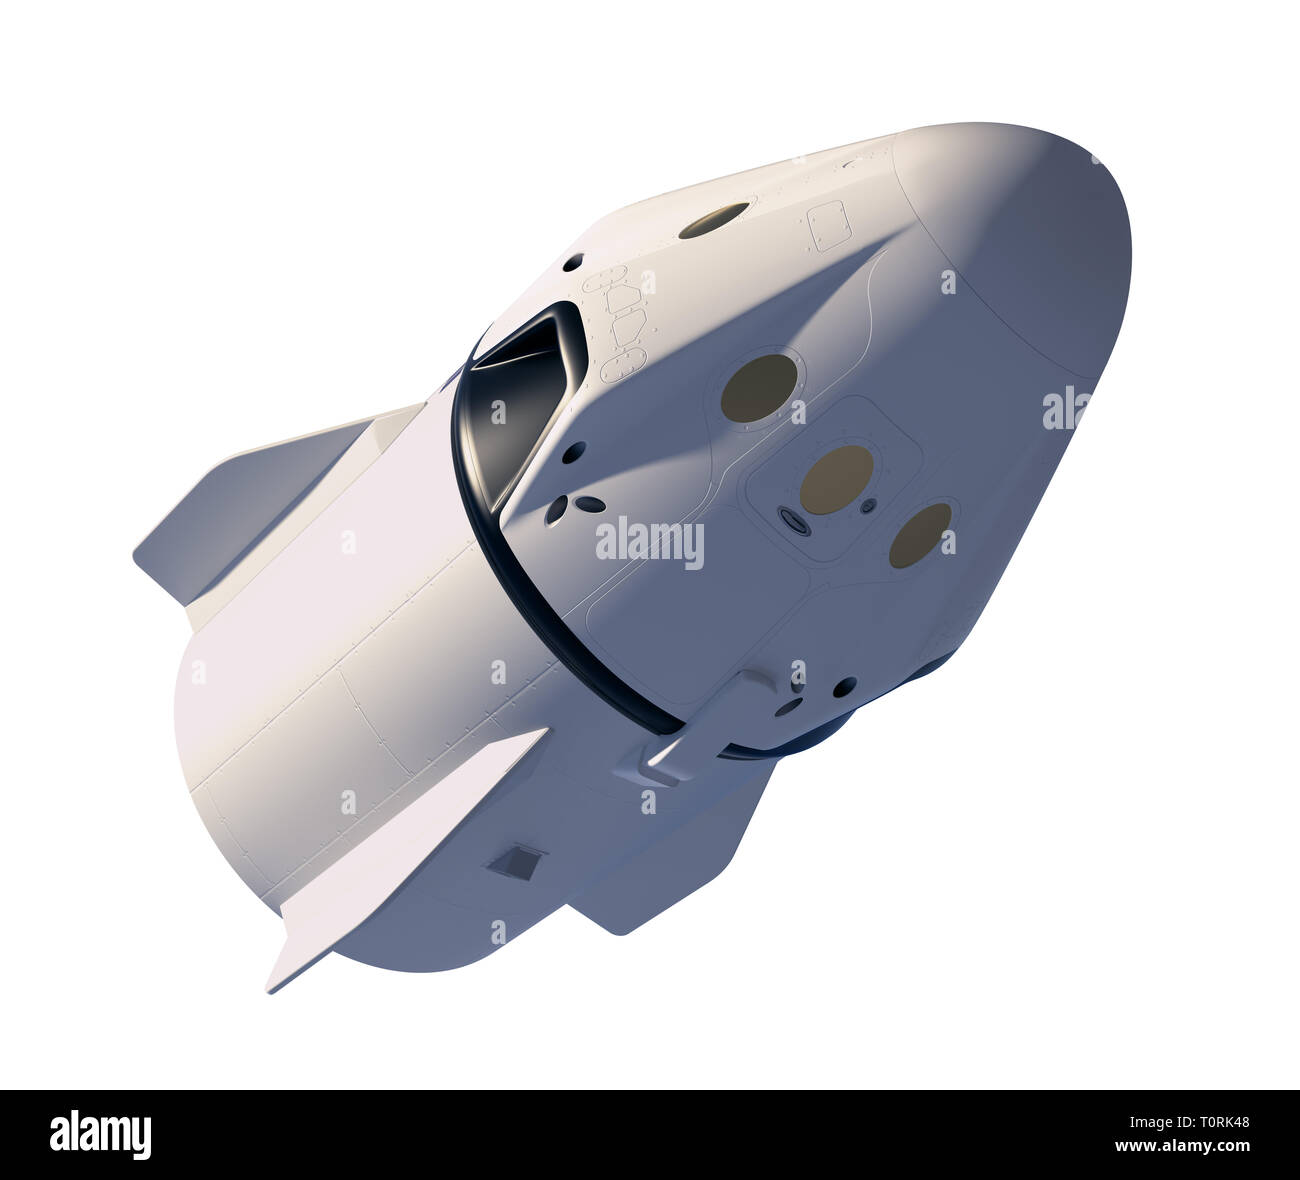 Commercial Crew Spacecraft Isolated On White Background. 3D Illustration. Stock Photo